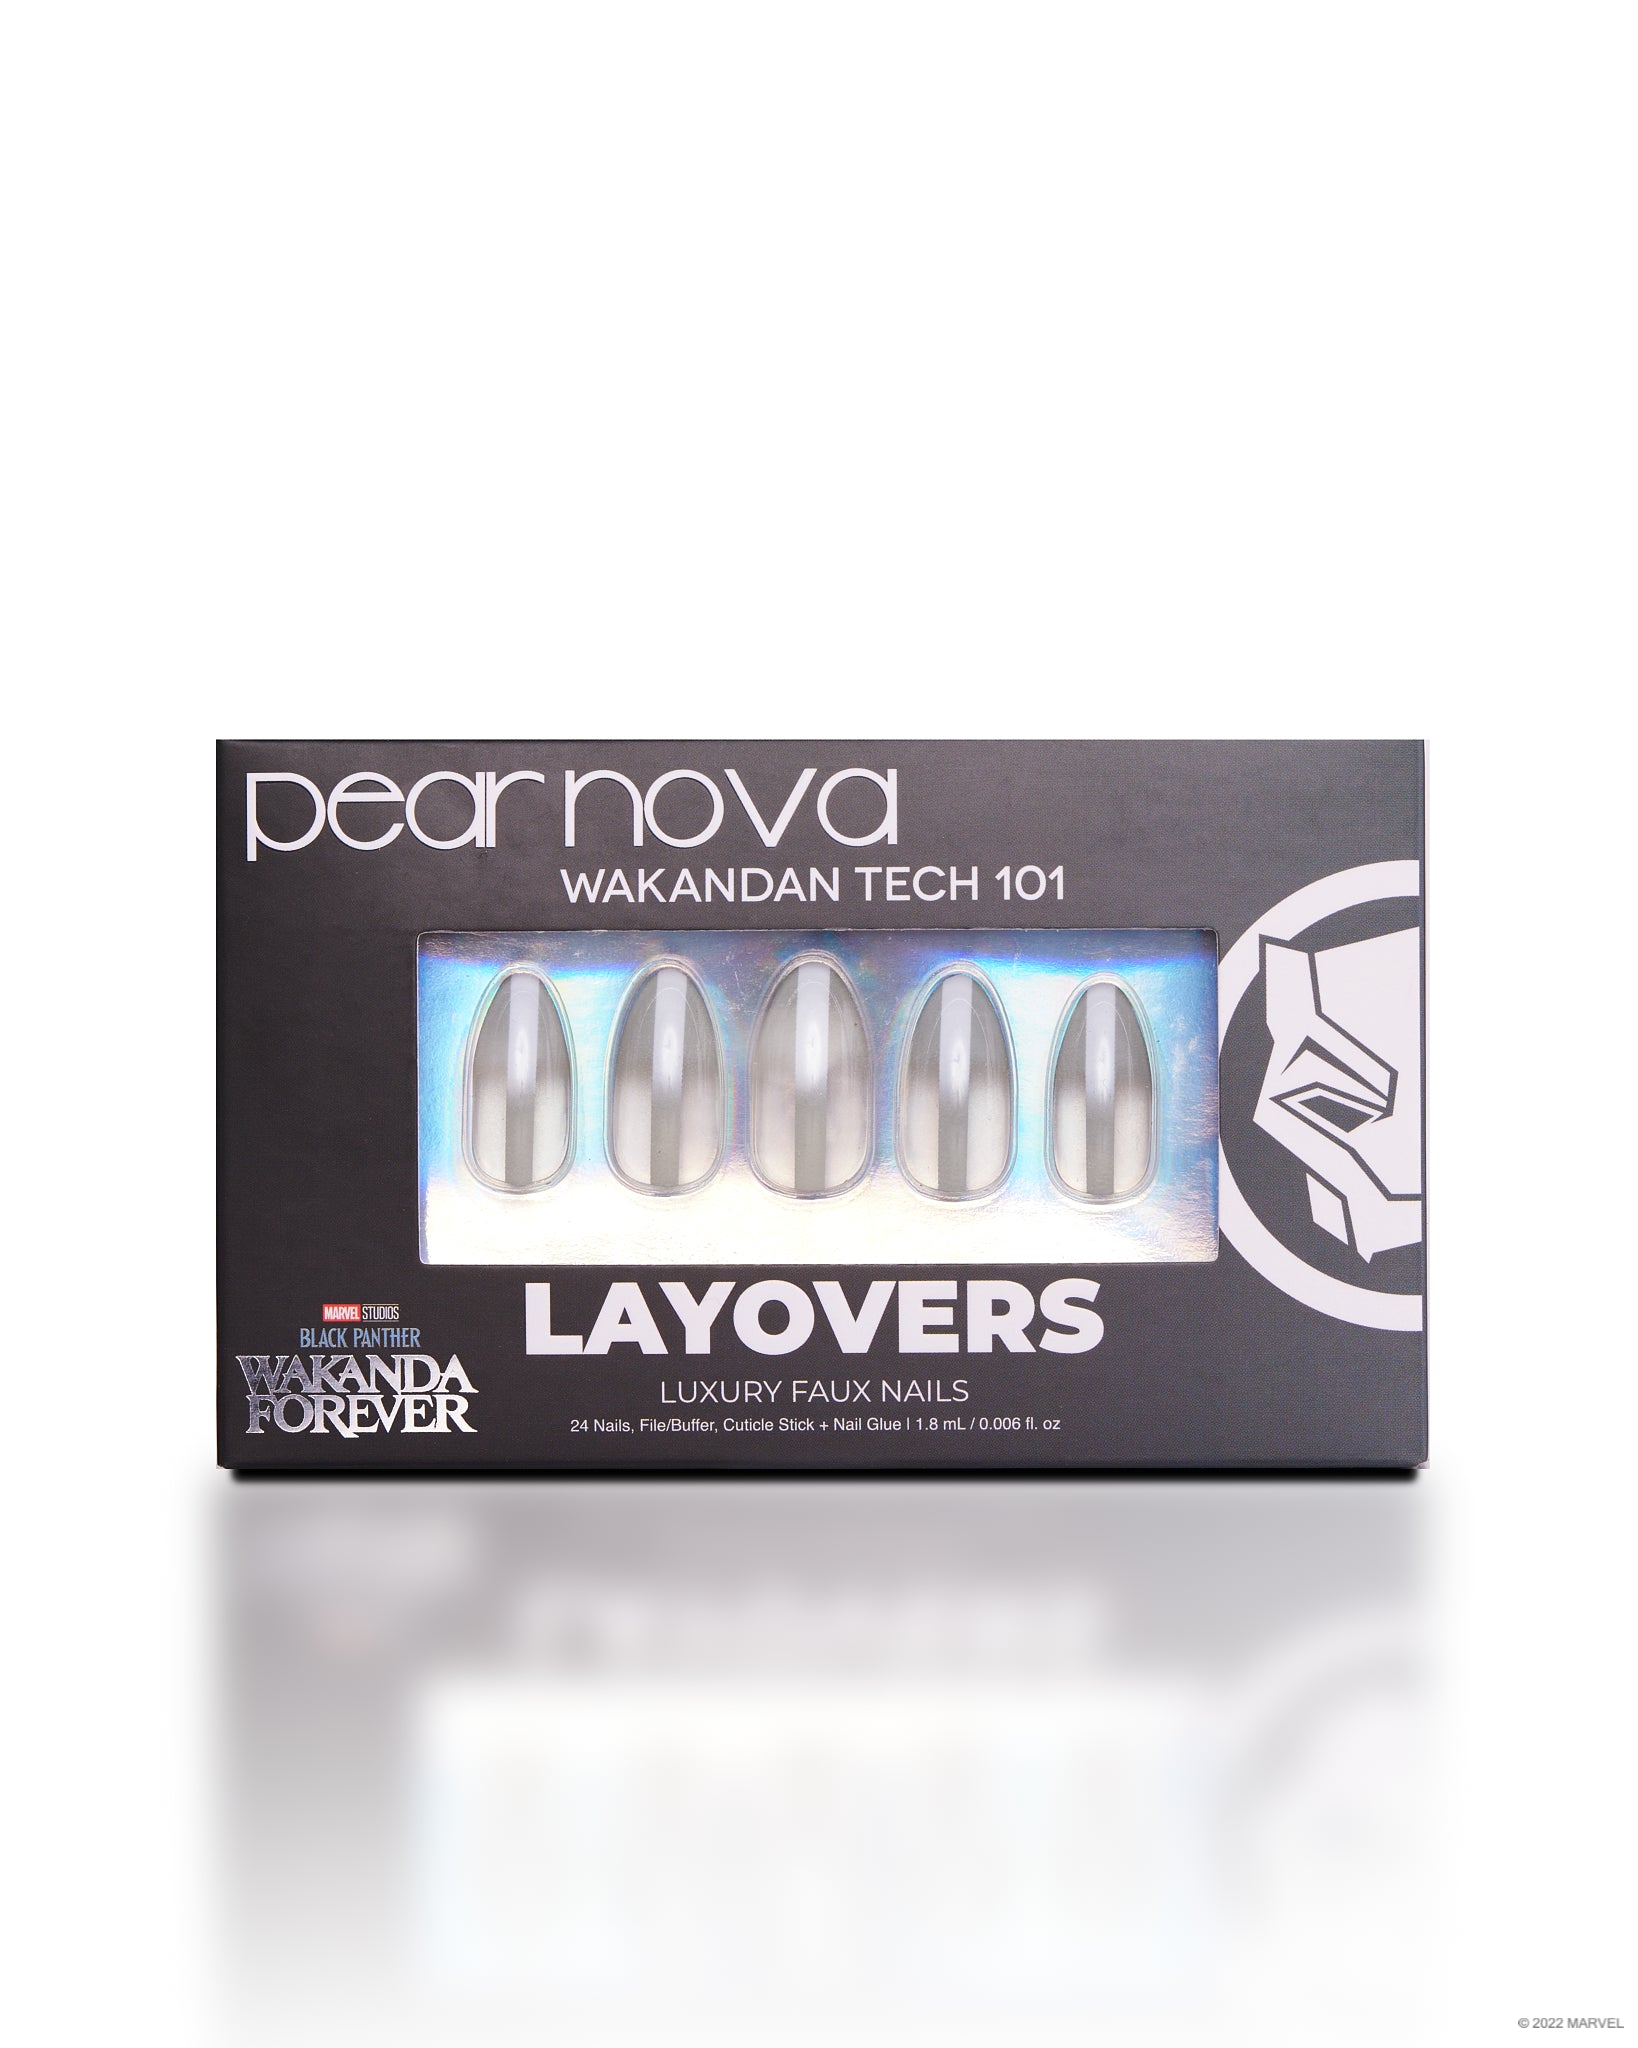 Marvel Studios' Black Panther: Wakanda Forever - Layovers Luxury Faux Nails Collection